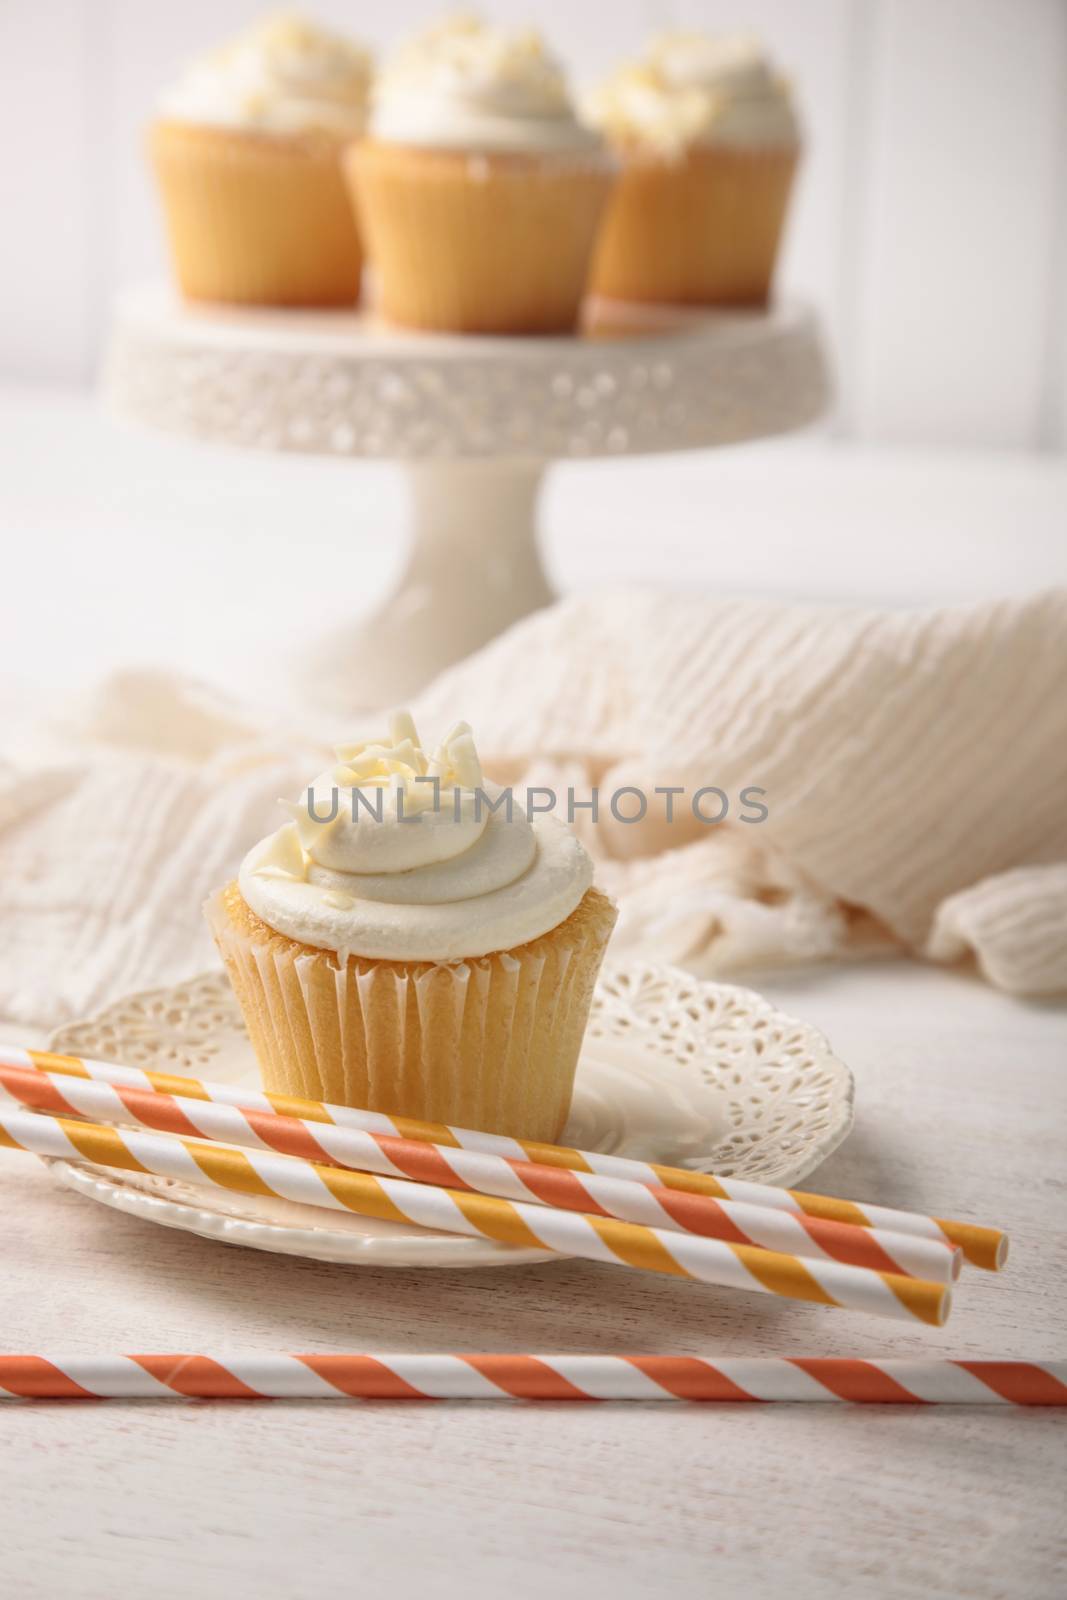 Sweet vanilla cupcake with straws by Sandralise